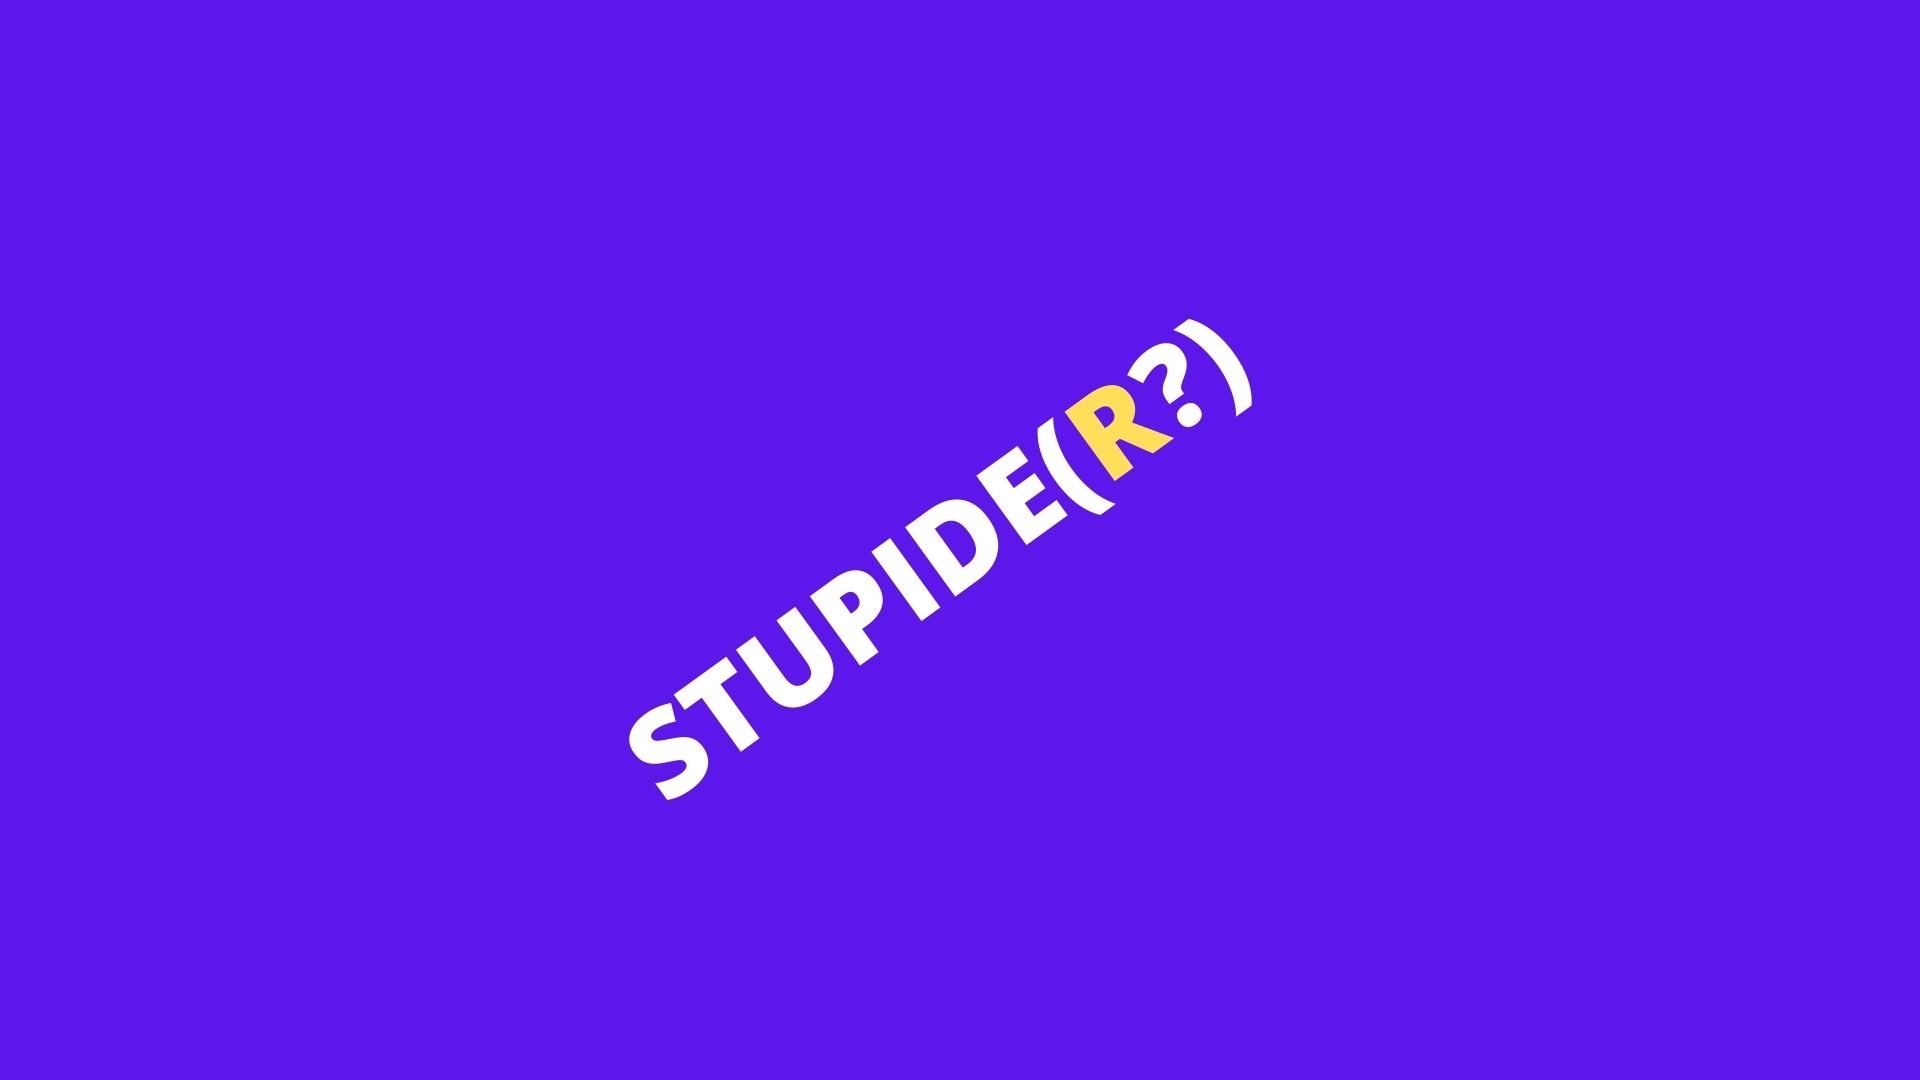 Graphic with the word "Stupid" and an "r" in paranthesis at the end.